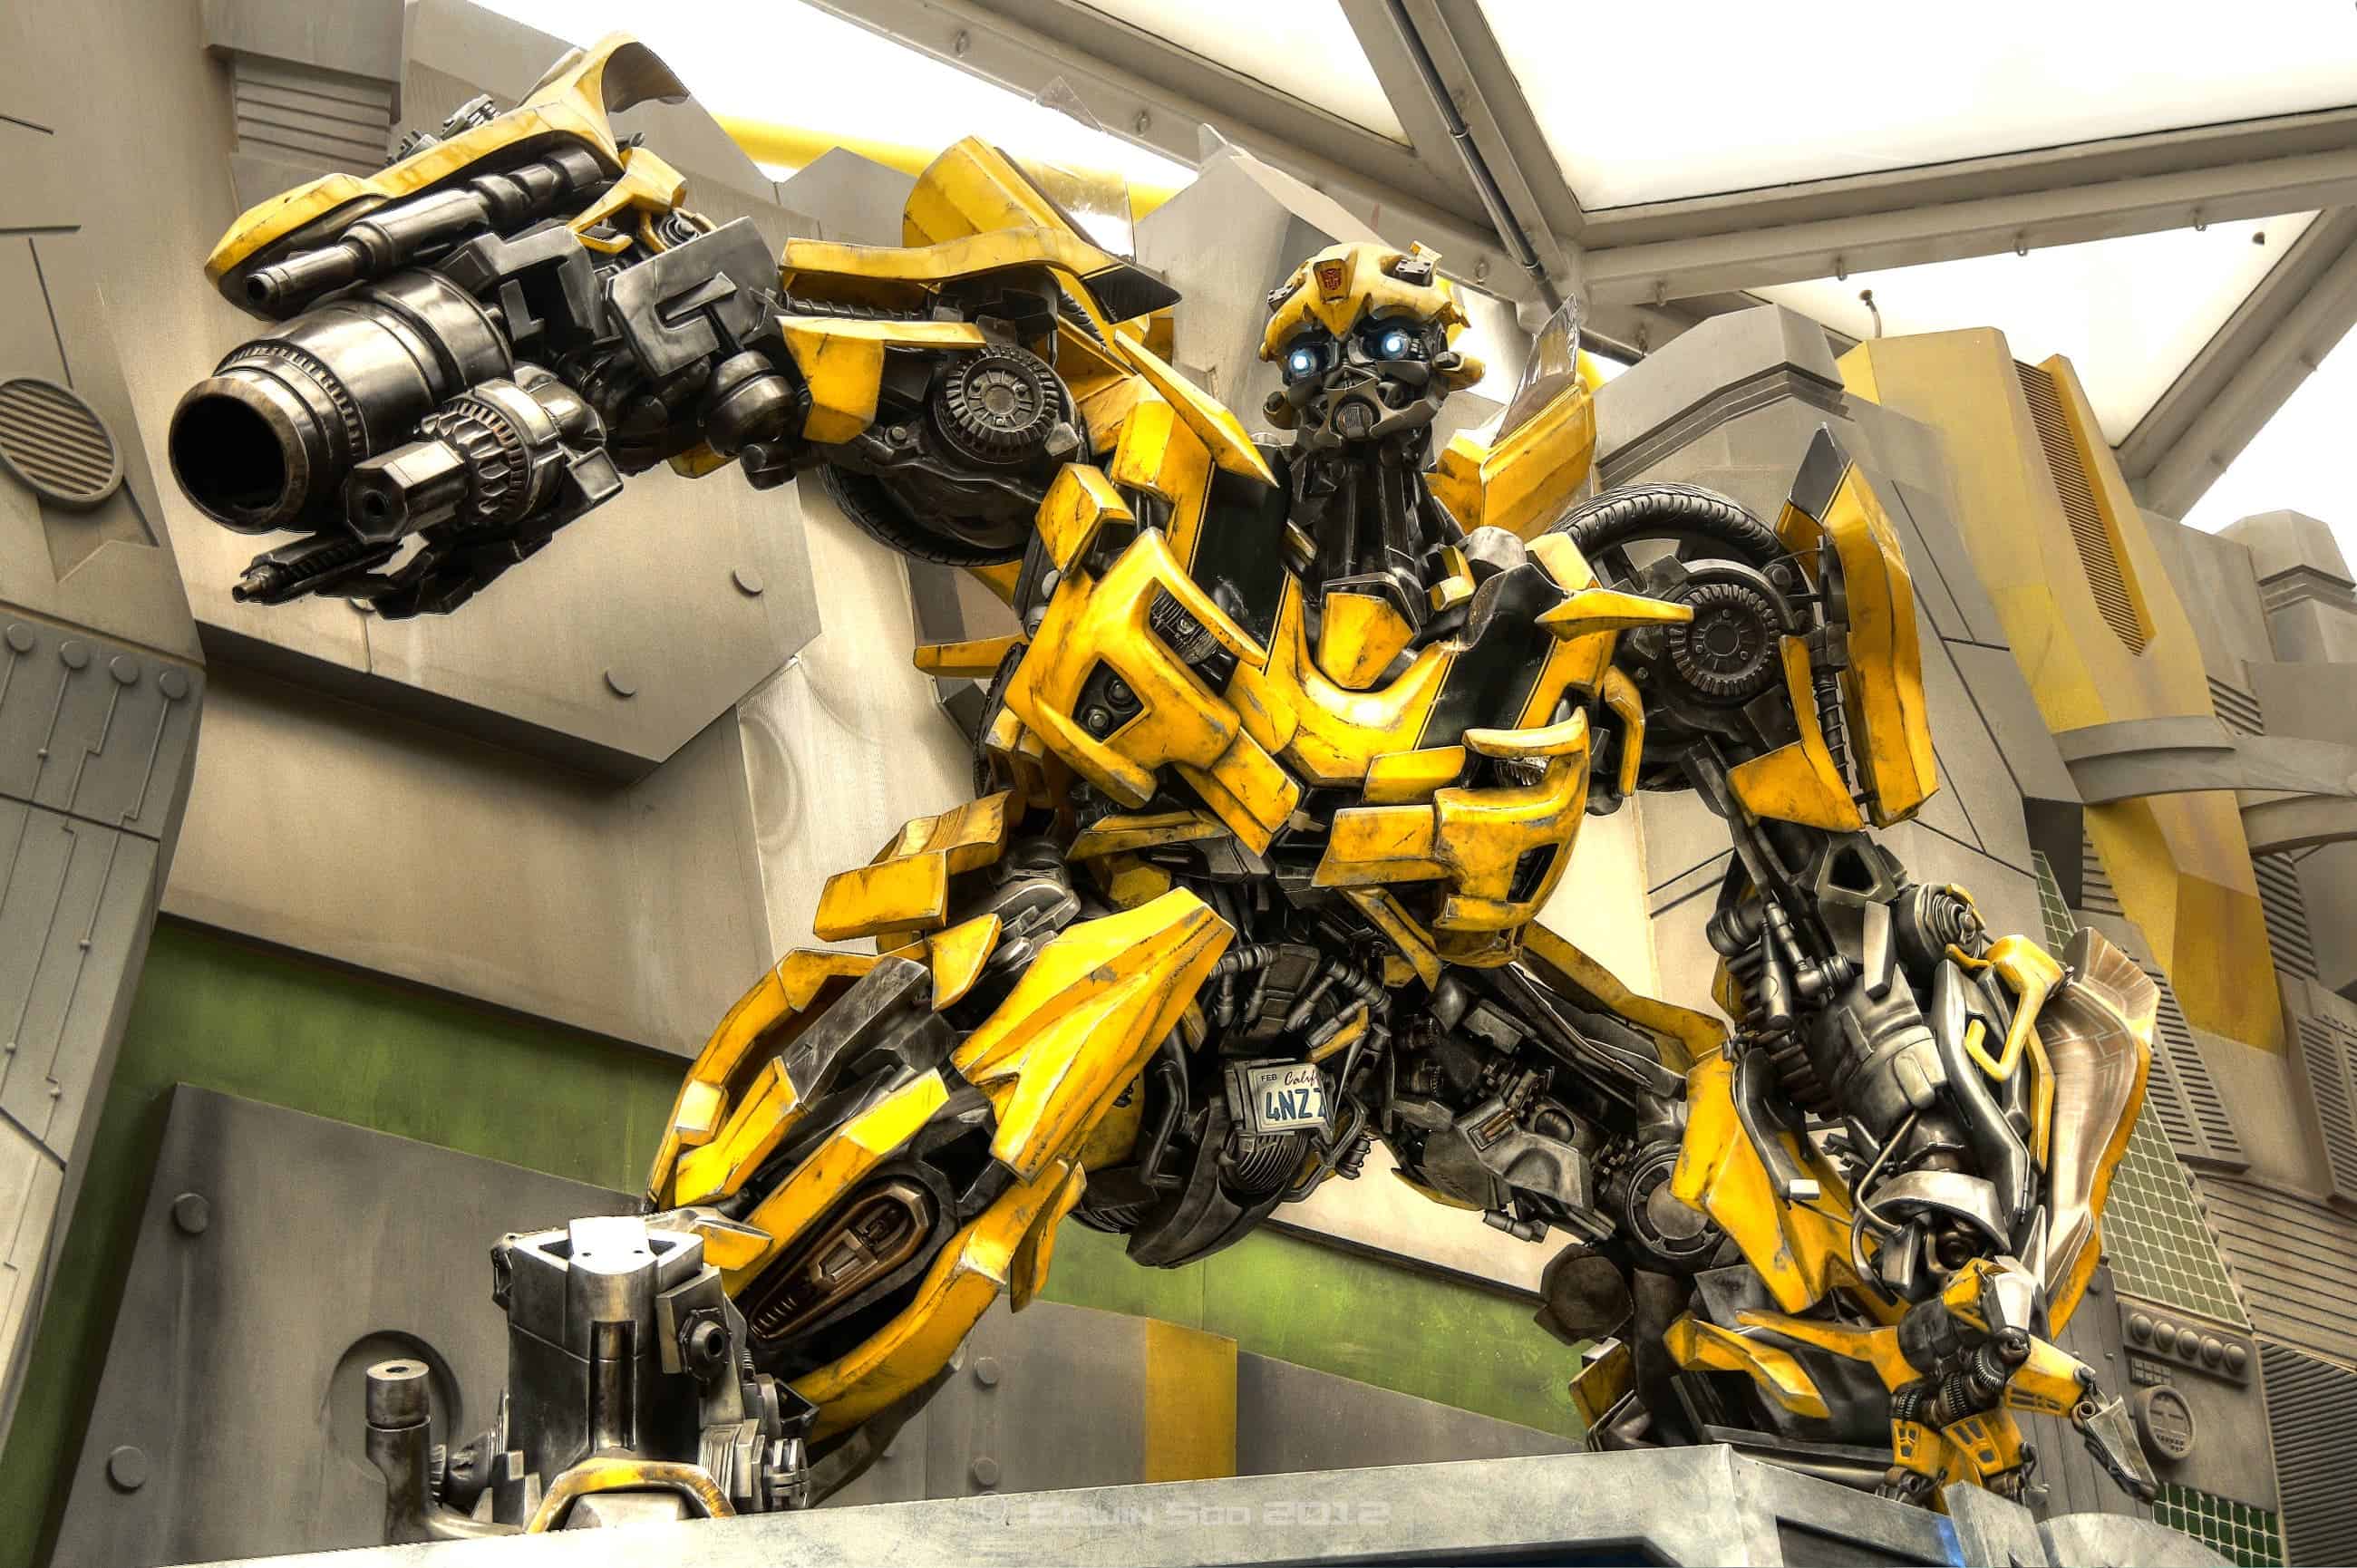 Transformers BumbleBee. Credit: Wikimedia Commons